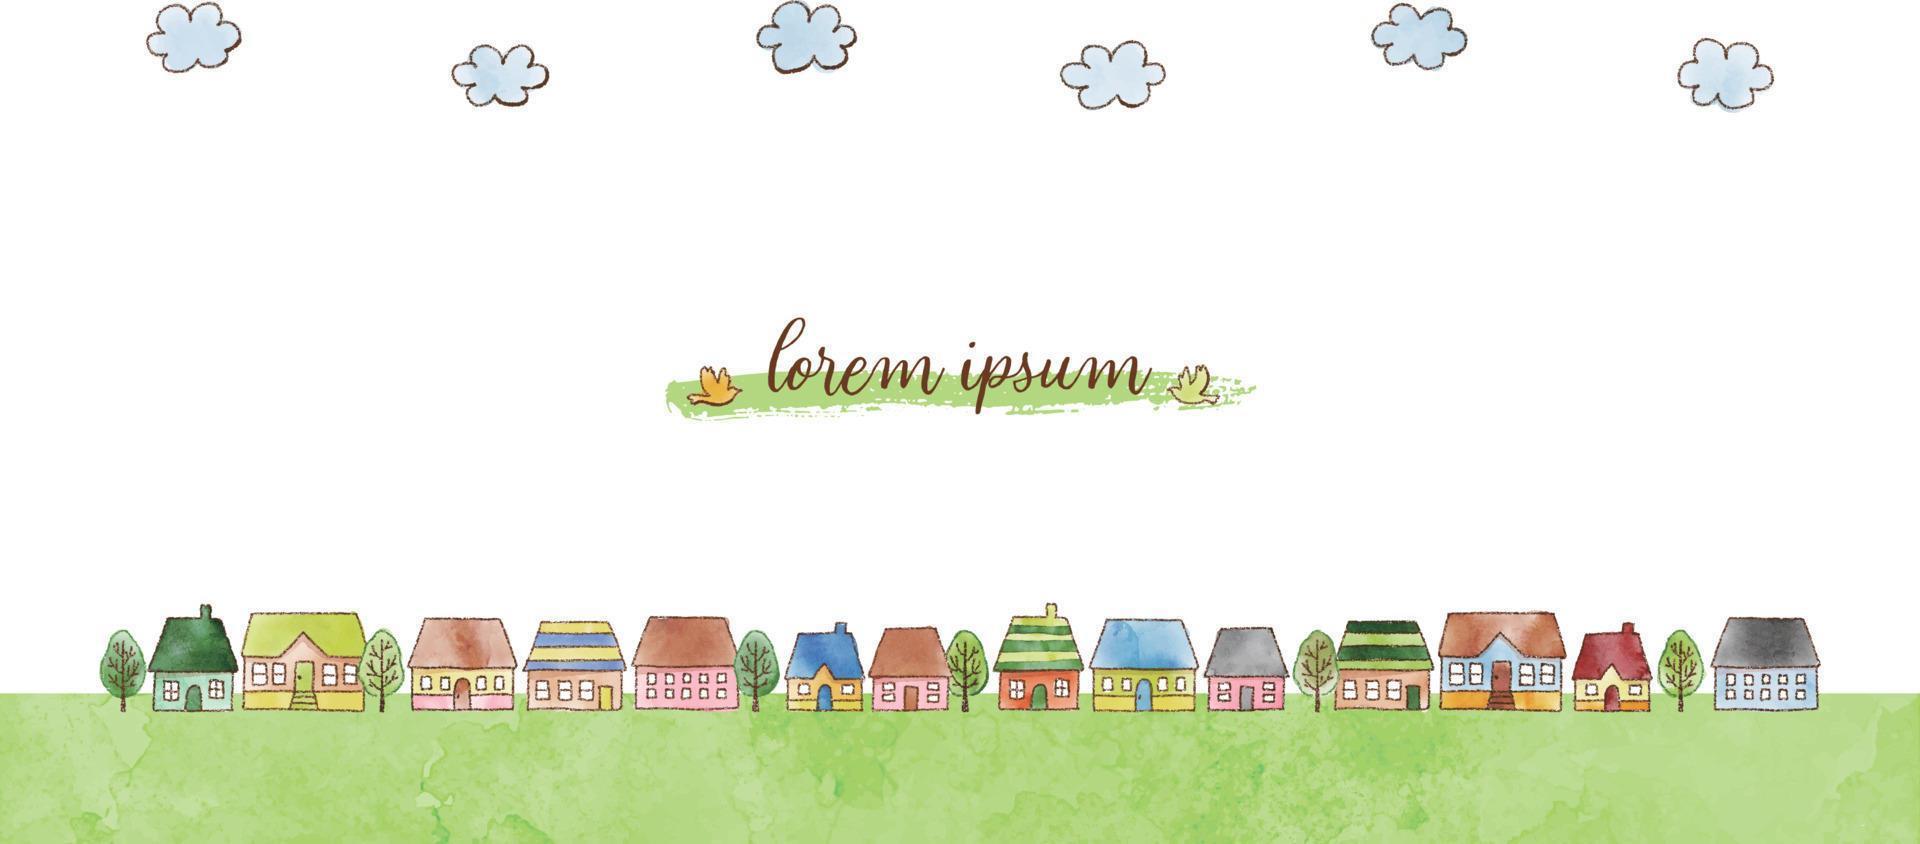 watercolor hand drawn houses and trees. cute townscape illustration for background vector